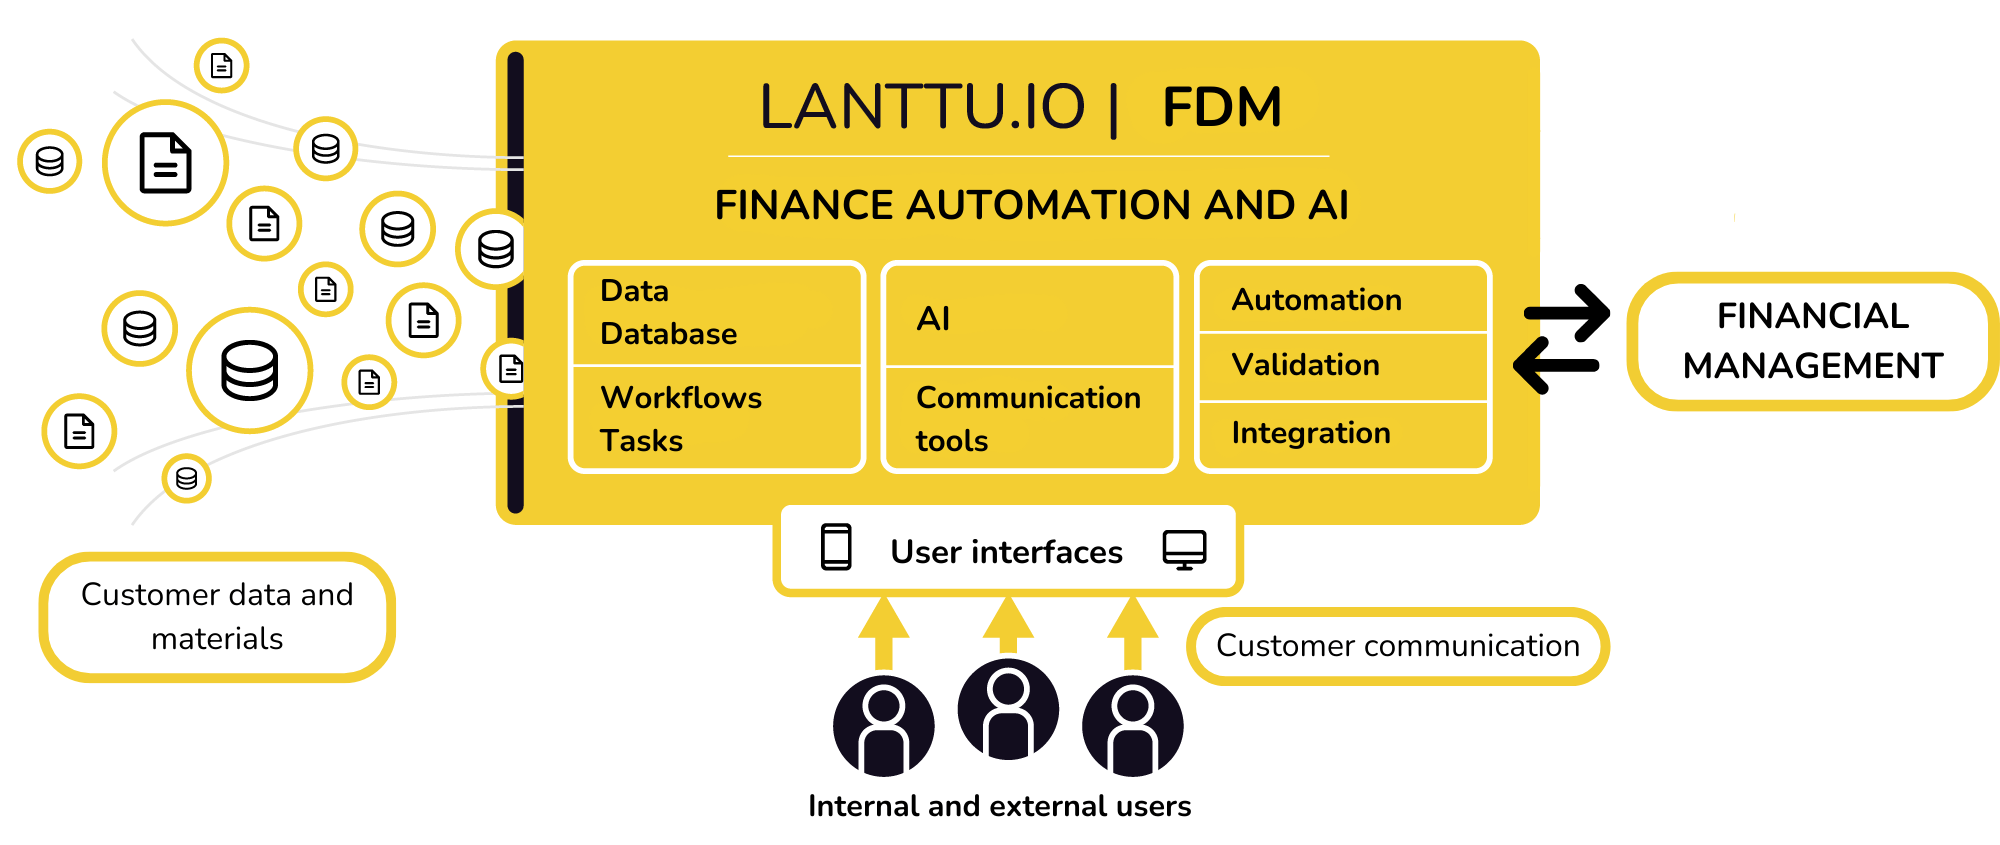 Lanttu.io's financial management automation and AI solution modernize the processes of the accounting firm.